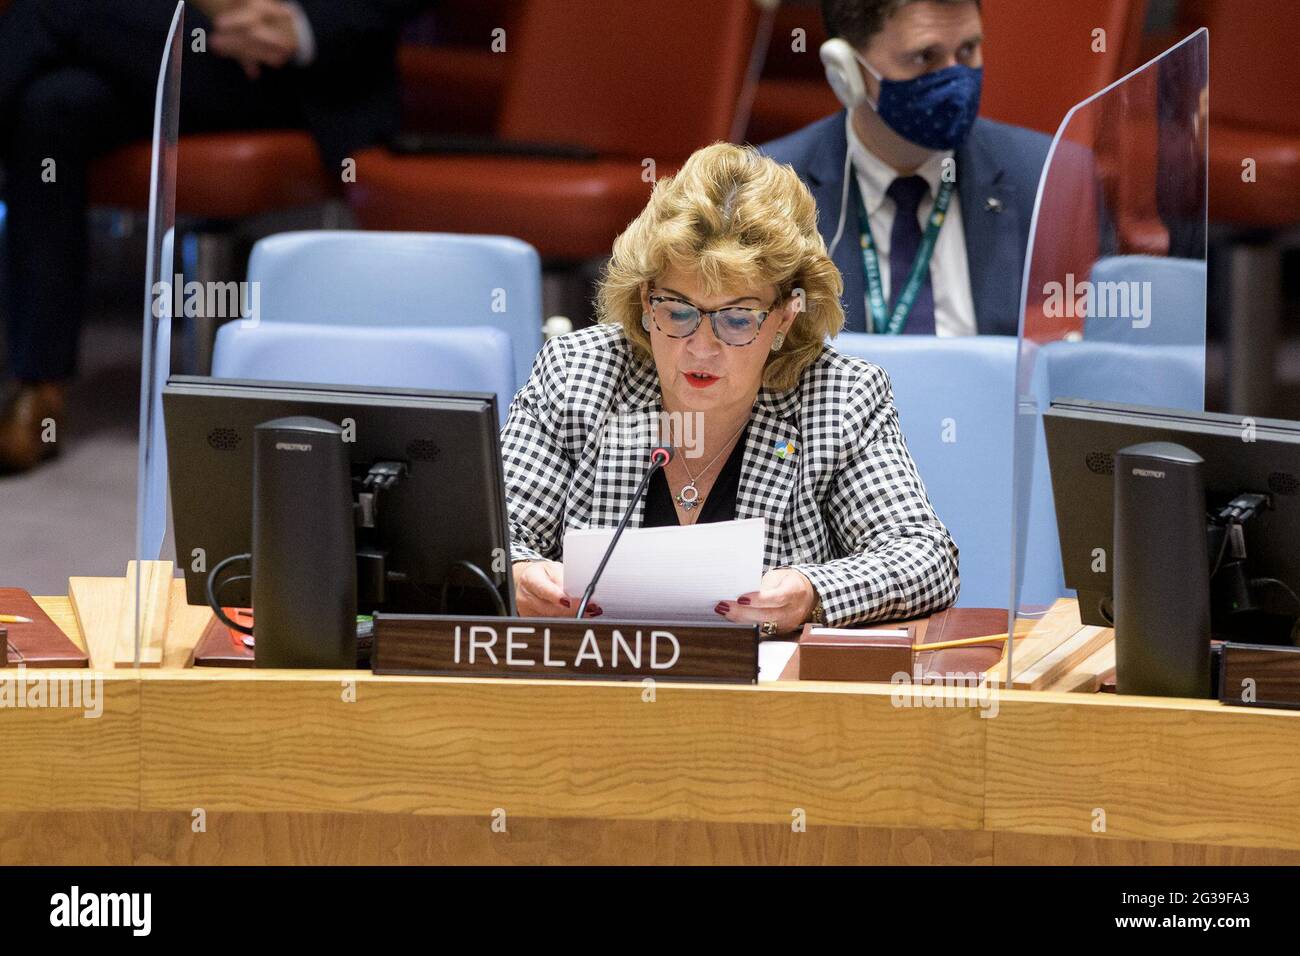 (210614) -- UNITED NATIONS, June 14, 2021 (Xinhua) -- Geraldine Byrne Nason (Front), permanent representative of Ireland to the United Nations and chair of the Security Council Committee pursuant to Resolution 751 (1992) concerning Somalia, addresses a UN Security Council meeting on the situation in Somalia at the UN headquarters in New York, on June 14, 2021. Three members of the Al-Shabaab armed group have been listed for sanctions during the reporting period to further help the federal government of Somalia fight the insurgents, the chair of the Security Council's sanctions regime for the c Stock Photo